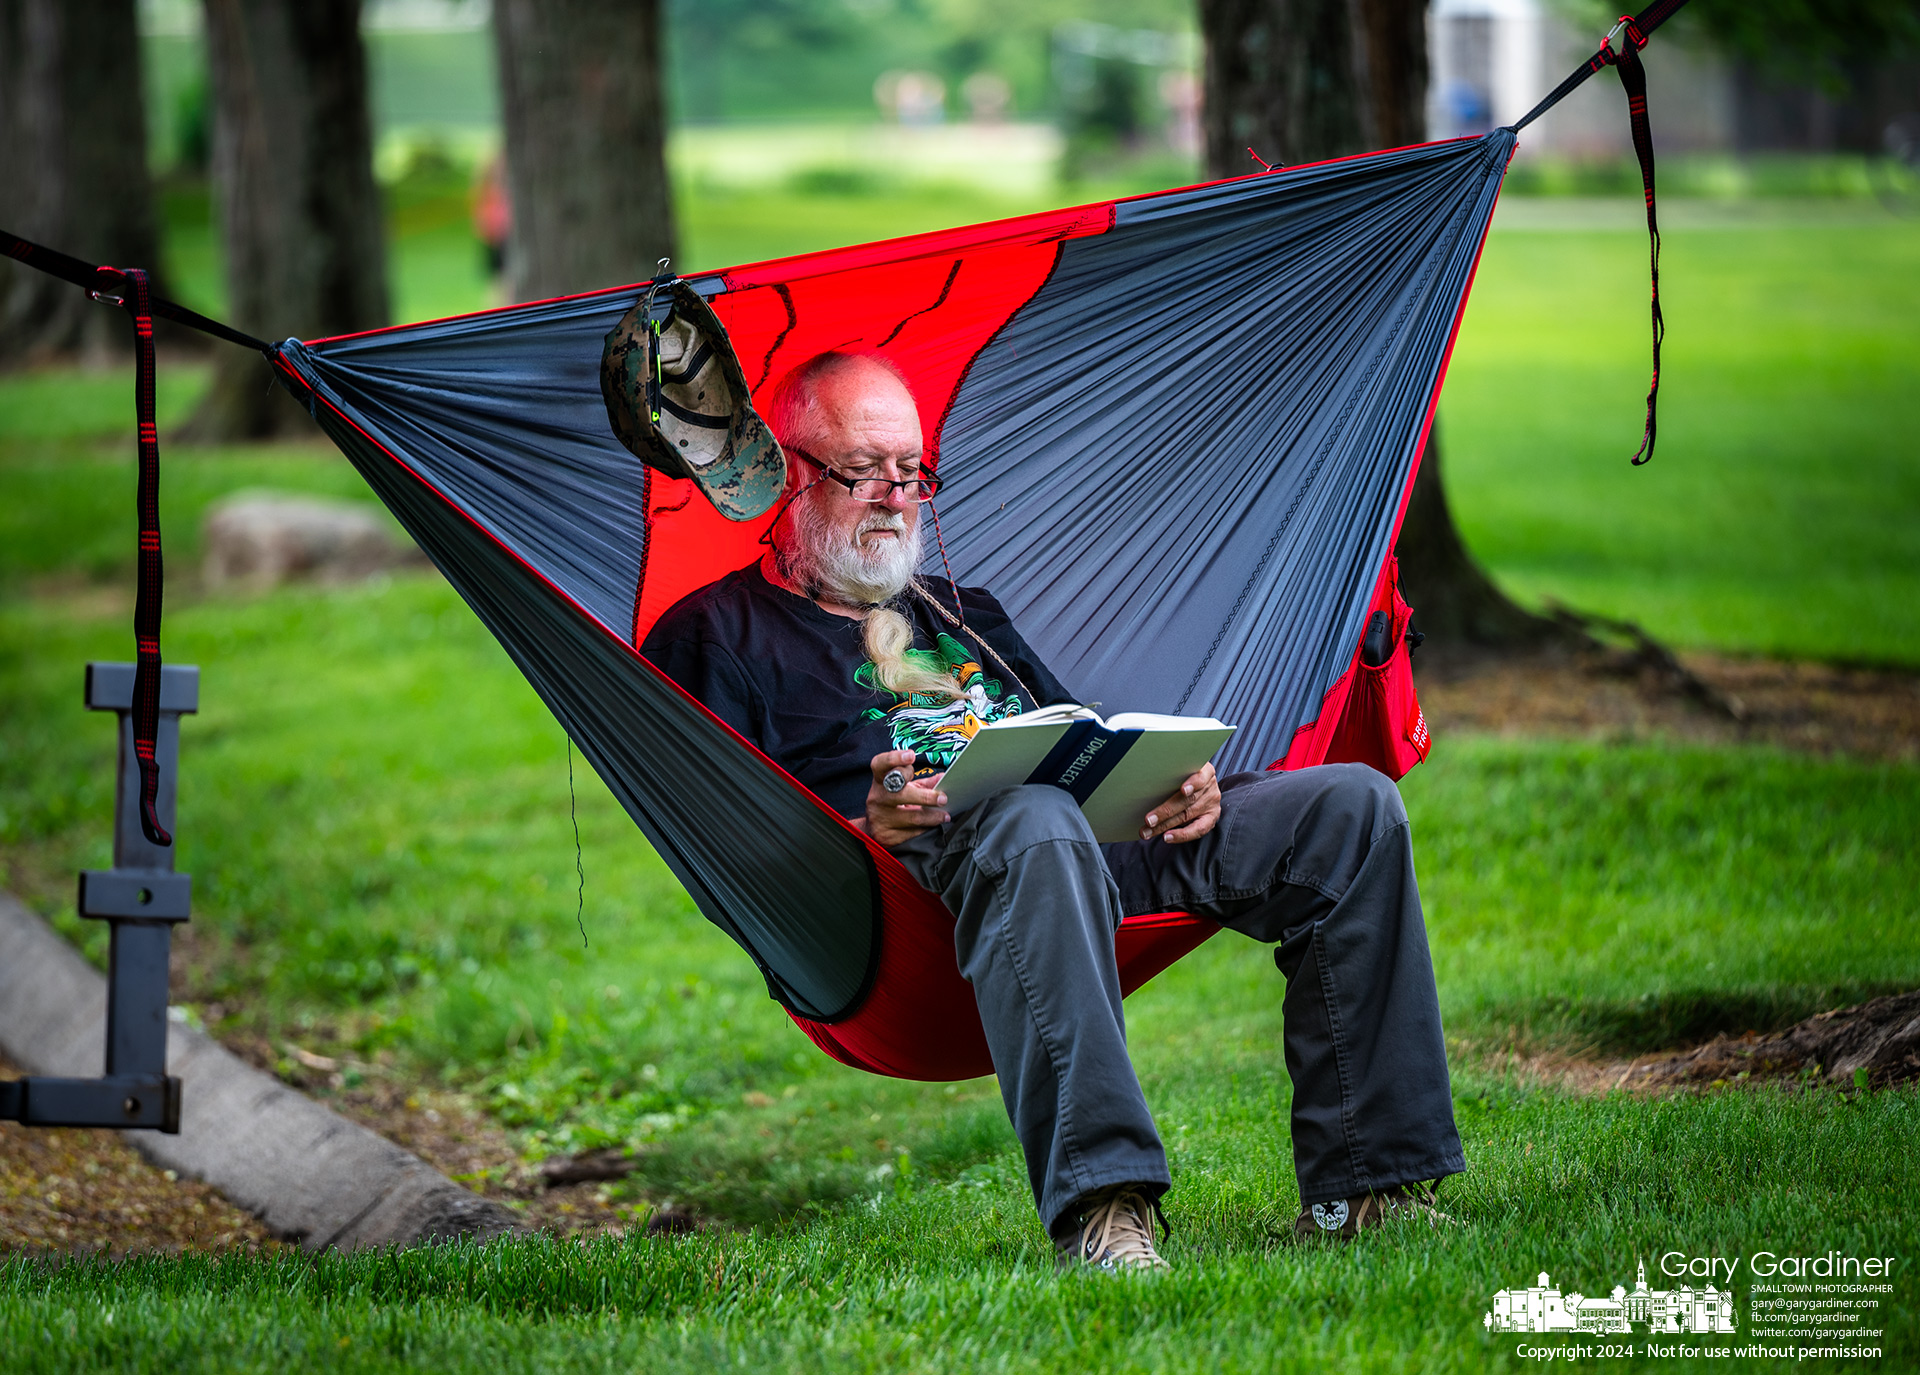 Russ Pederson enjoys a cigar, a book, the shade, and his hammock in the solitude of a corner of Alum Creek Park North away from the playground and fields and close to the rushing waters of the dam. My Final Photo for May 22, 2024.